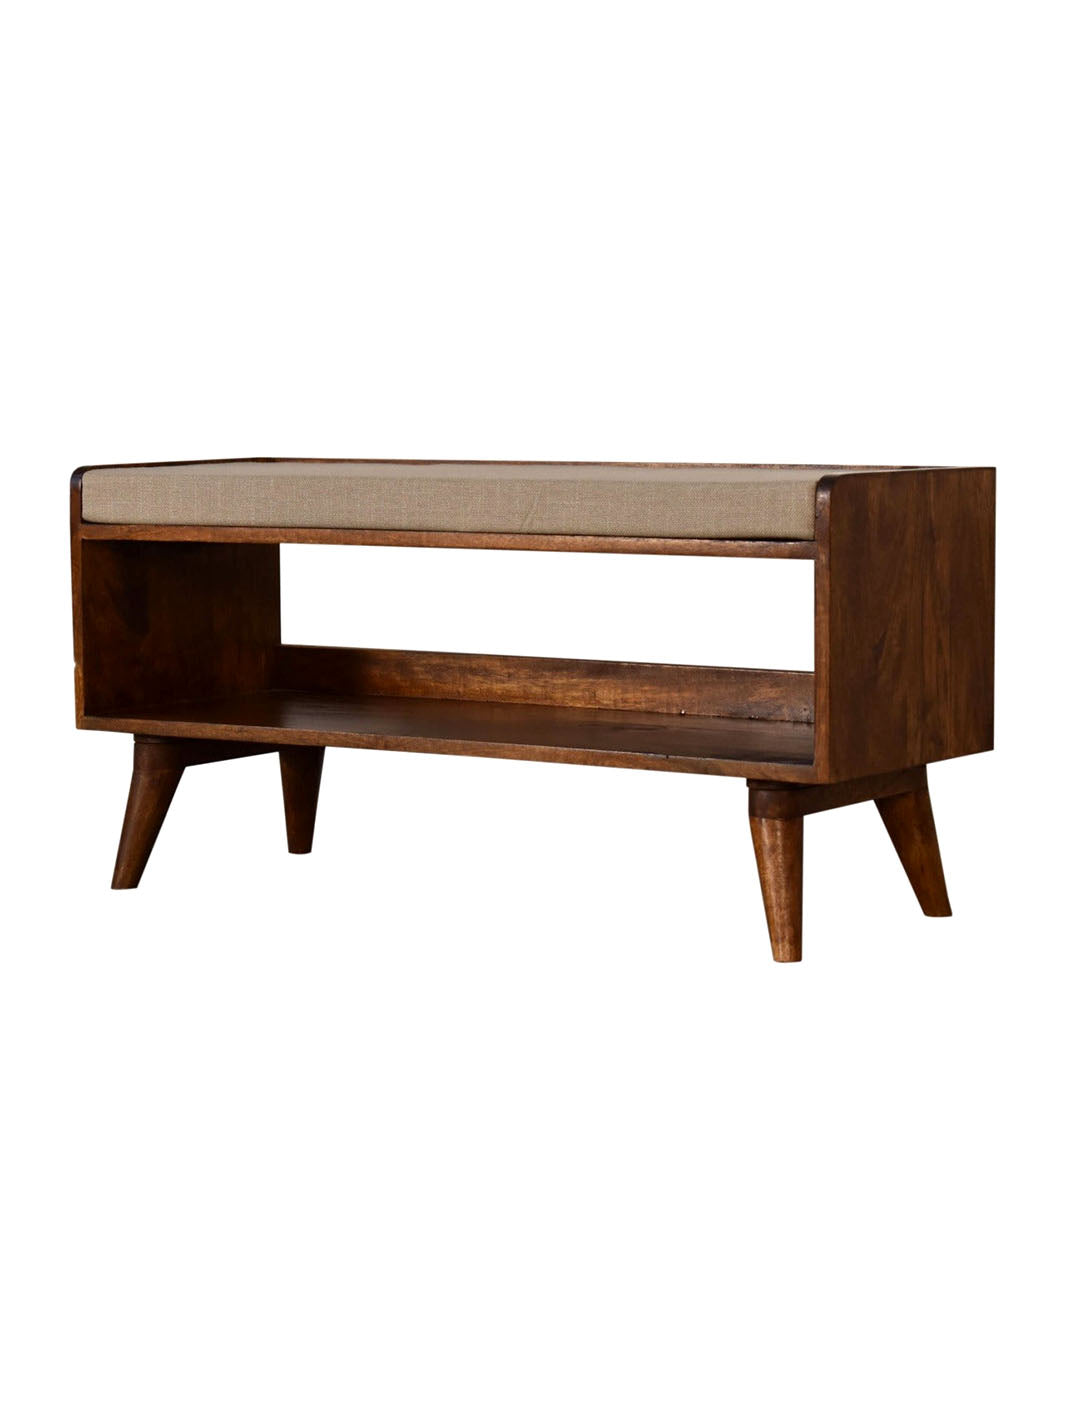 Artisan Furniture Storage & Entryway Benches Nordic Chestnut Finish Storage Bench with